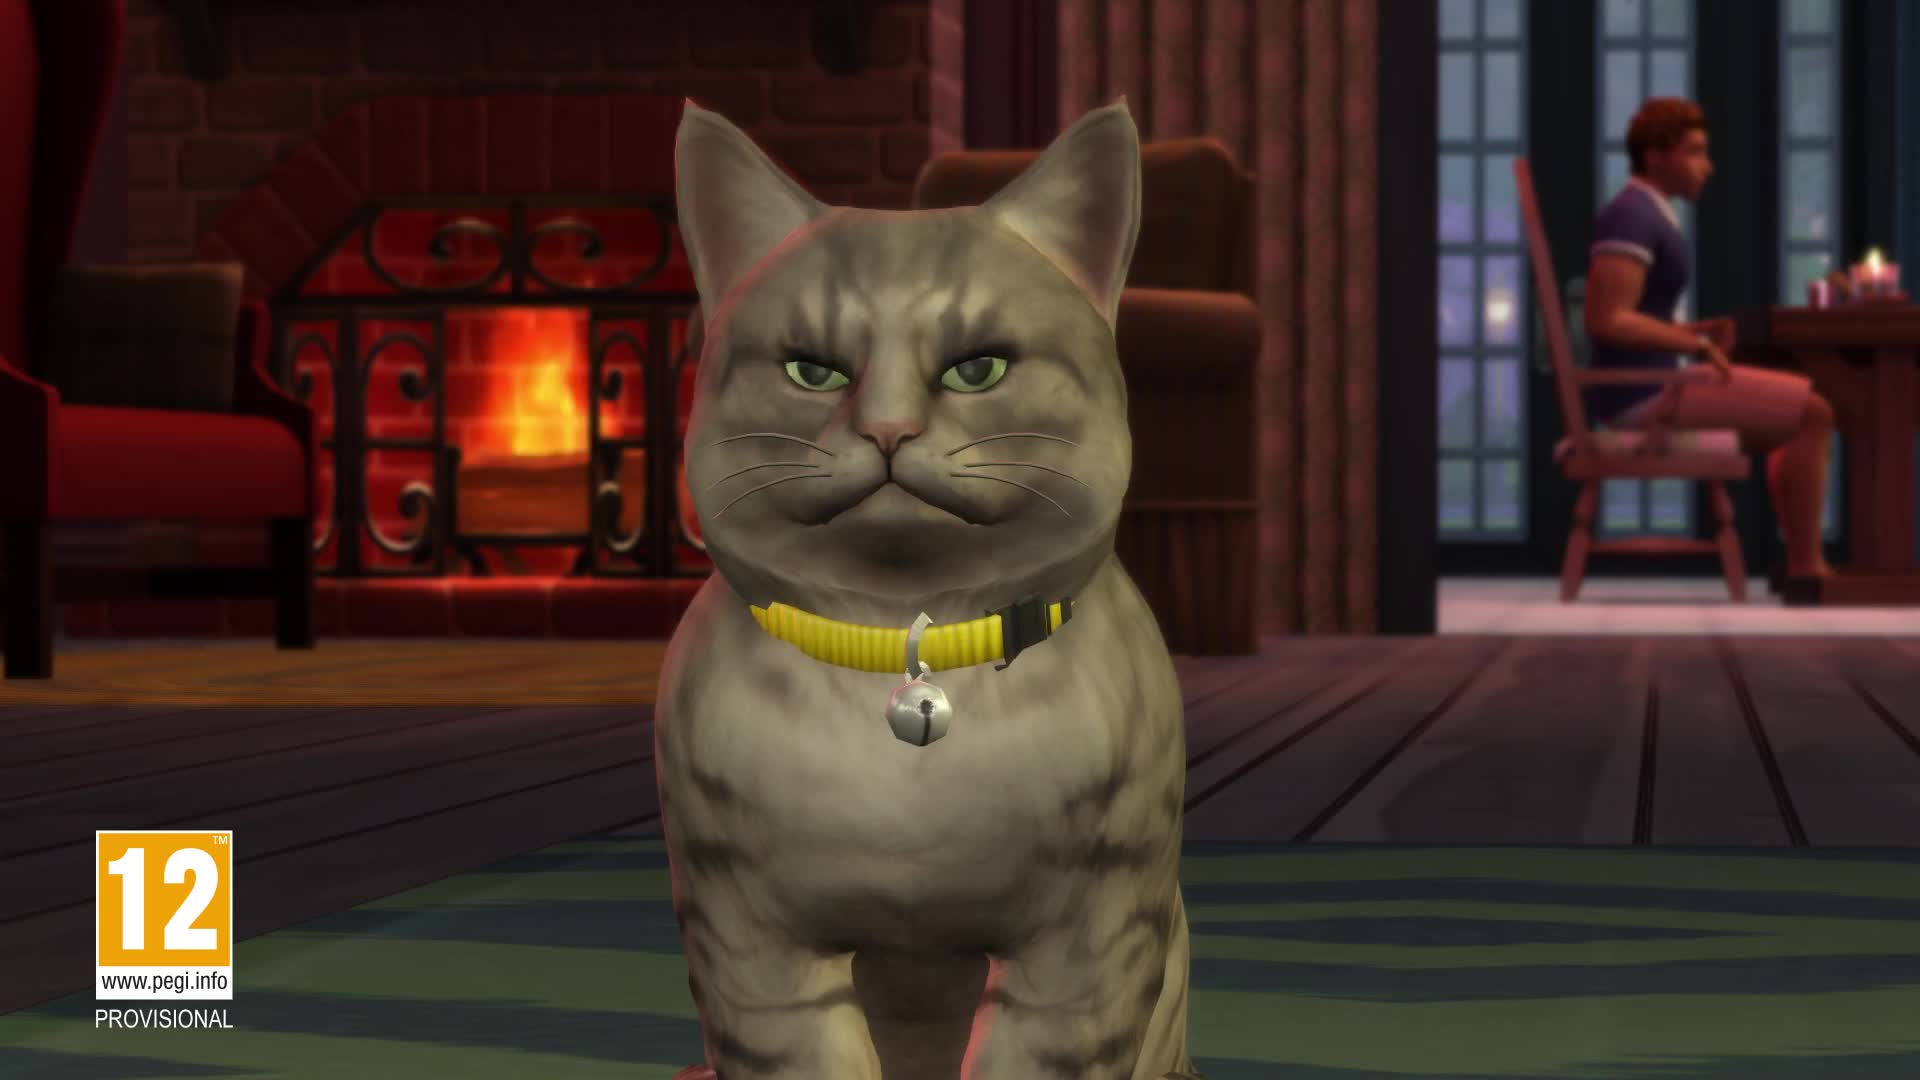 tralier of the sims 4 cats and dogs